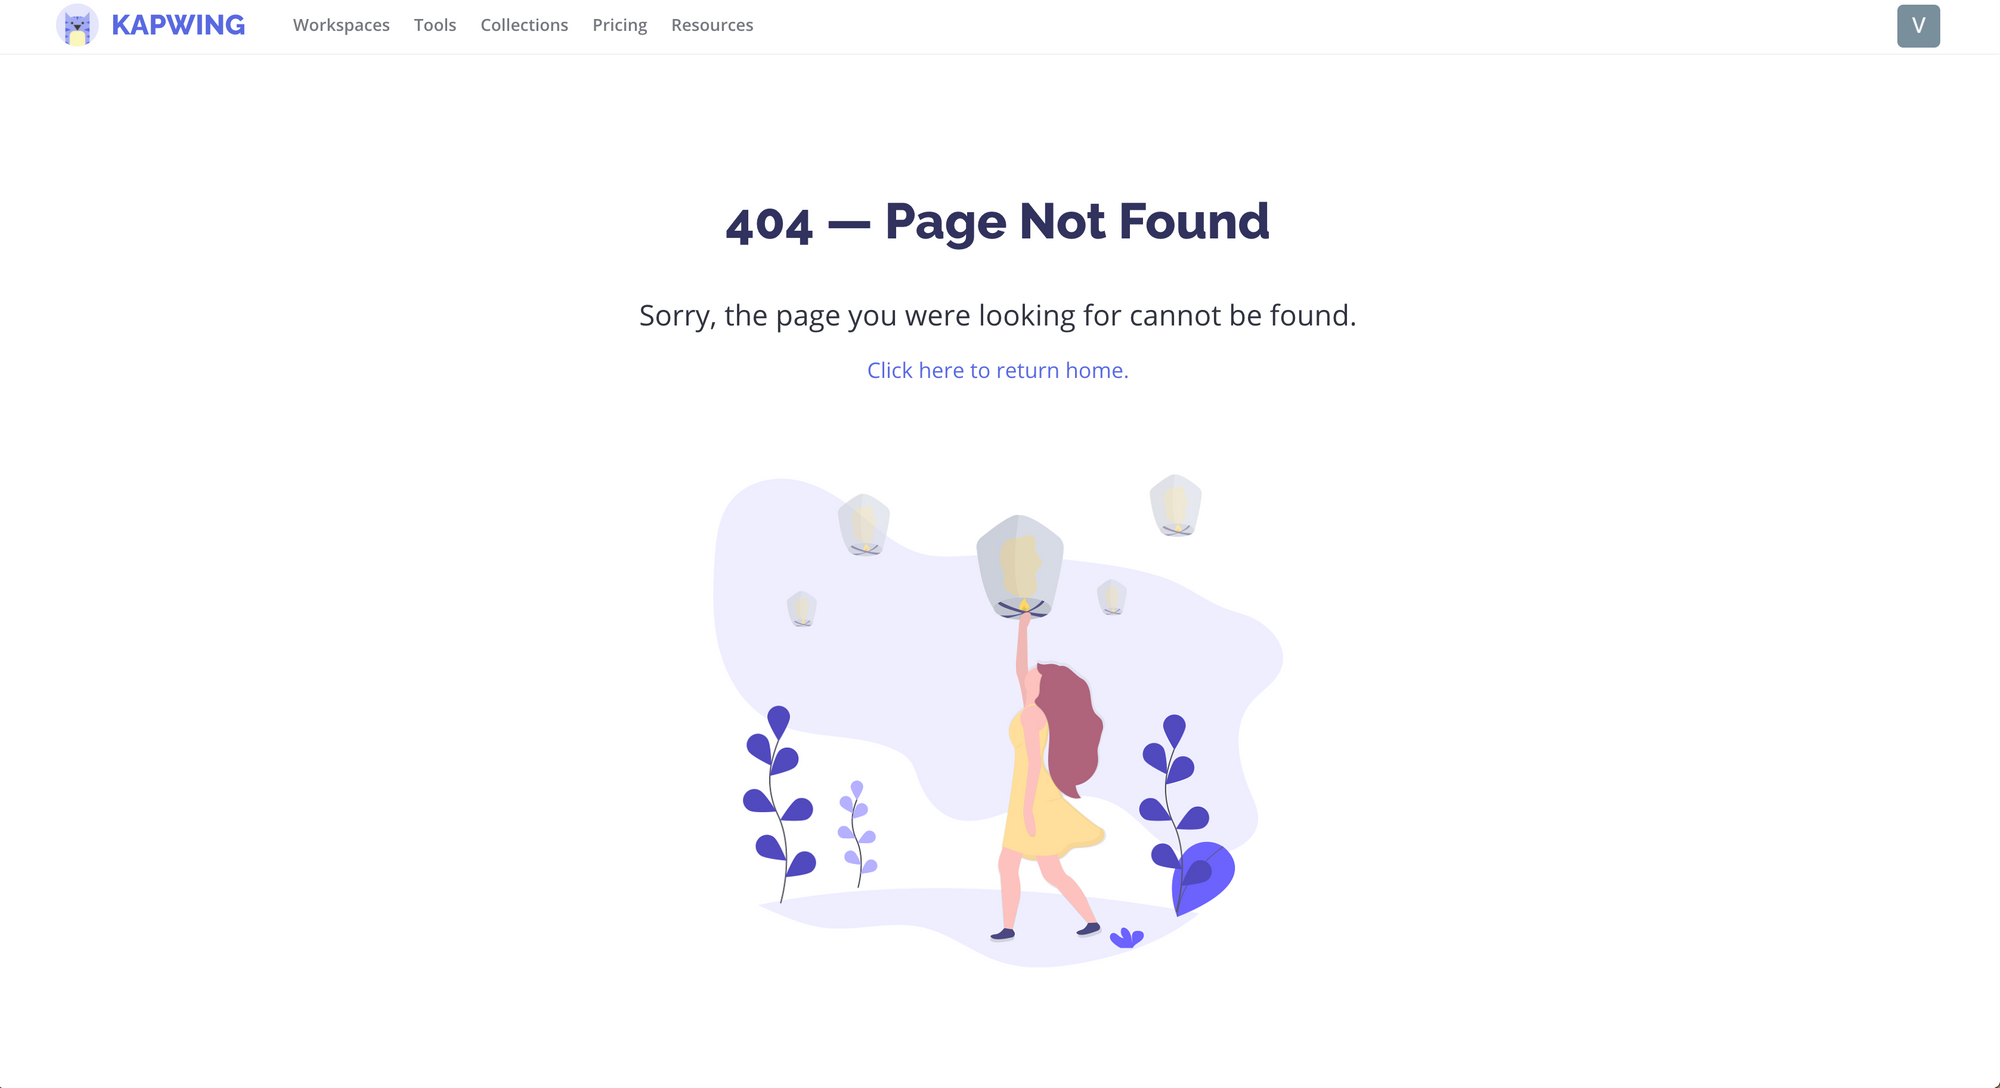 A screenshot of a 404 error page not found page with additional text, a link to return home, and a graphic of a girl lifting a lantern into a lavender clouded sky